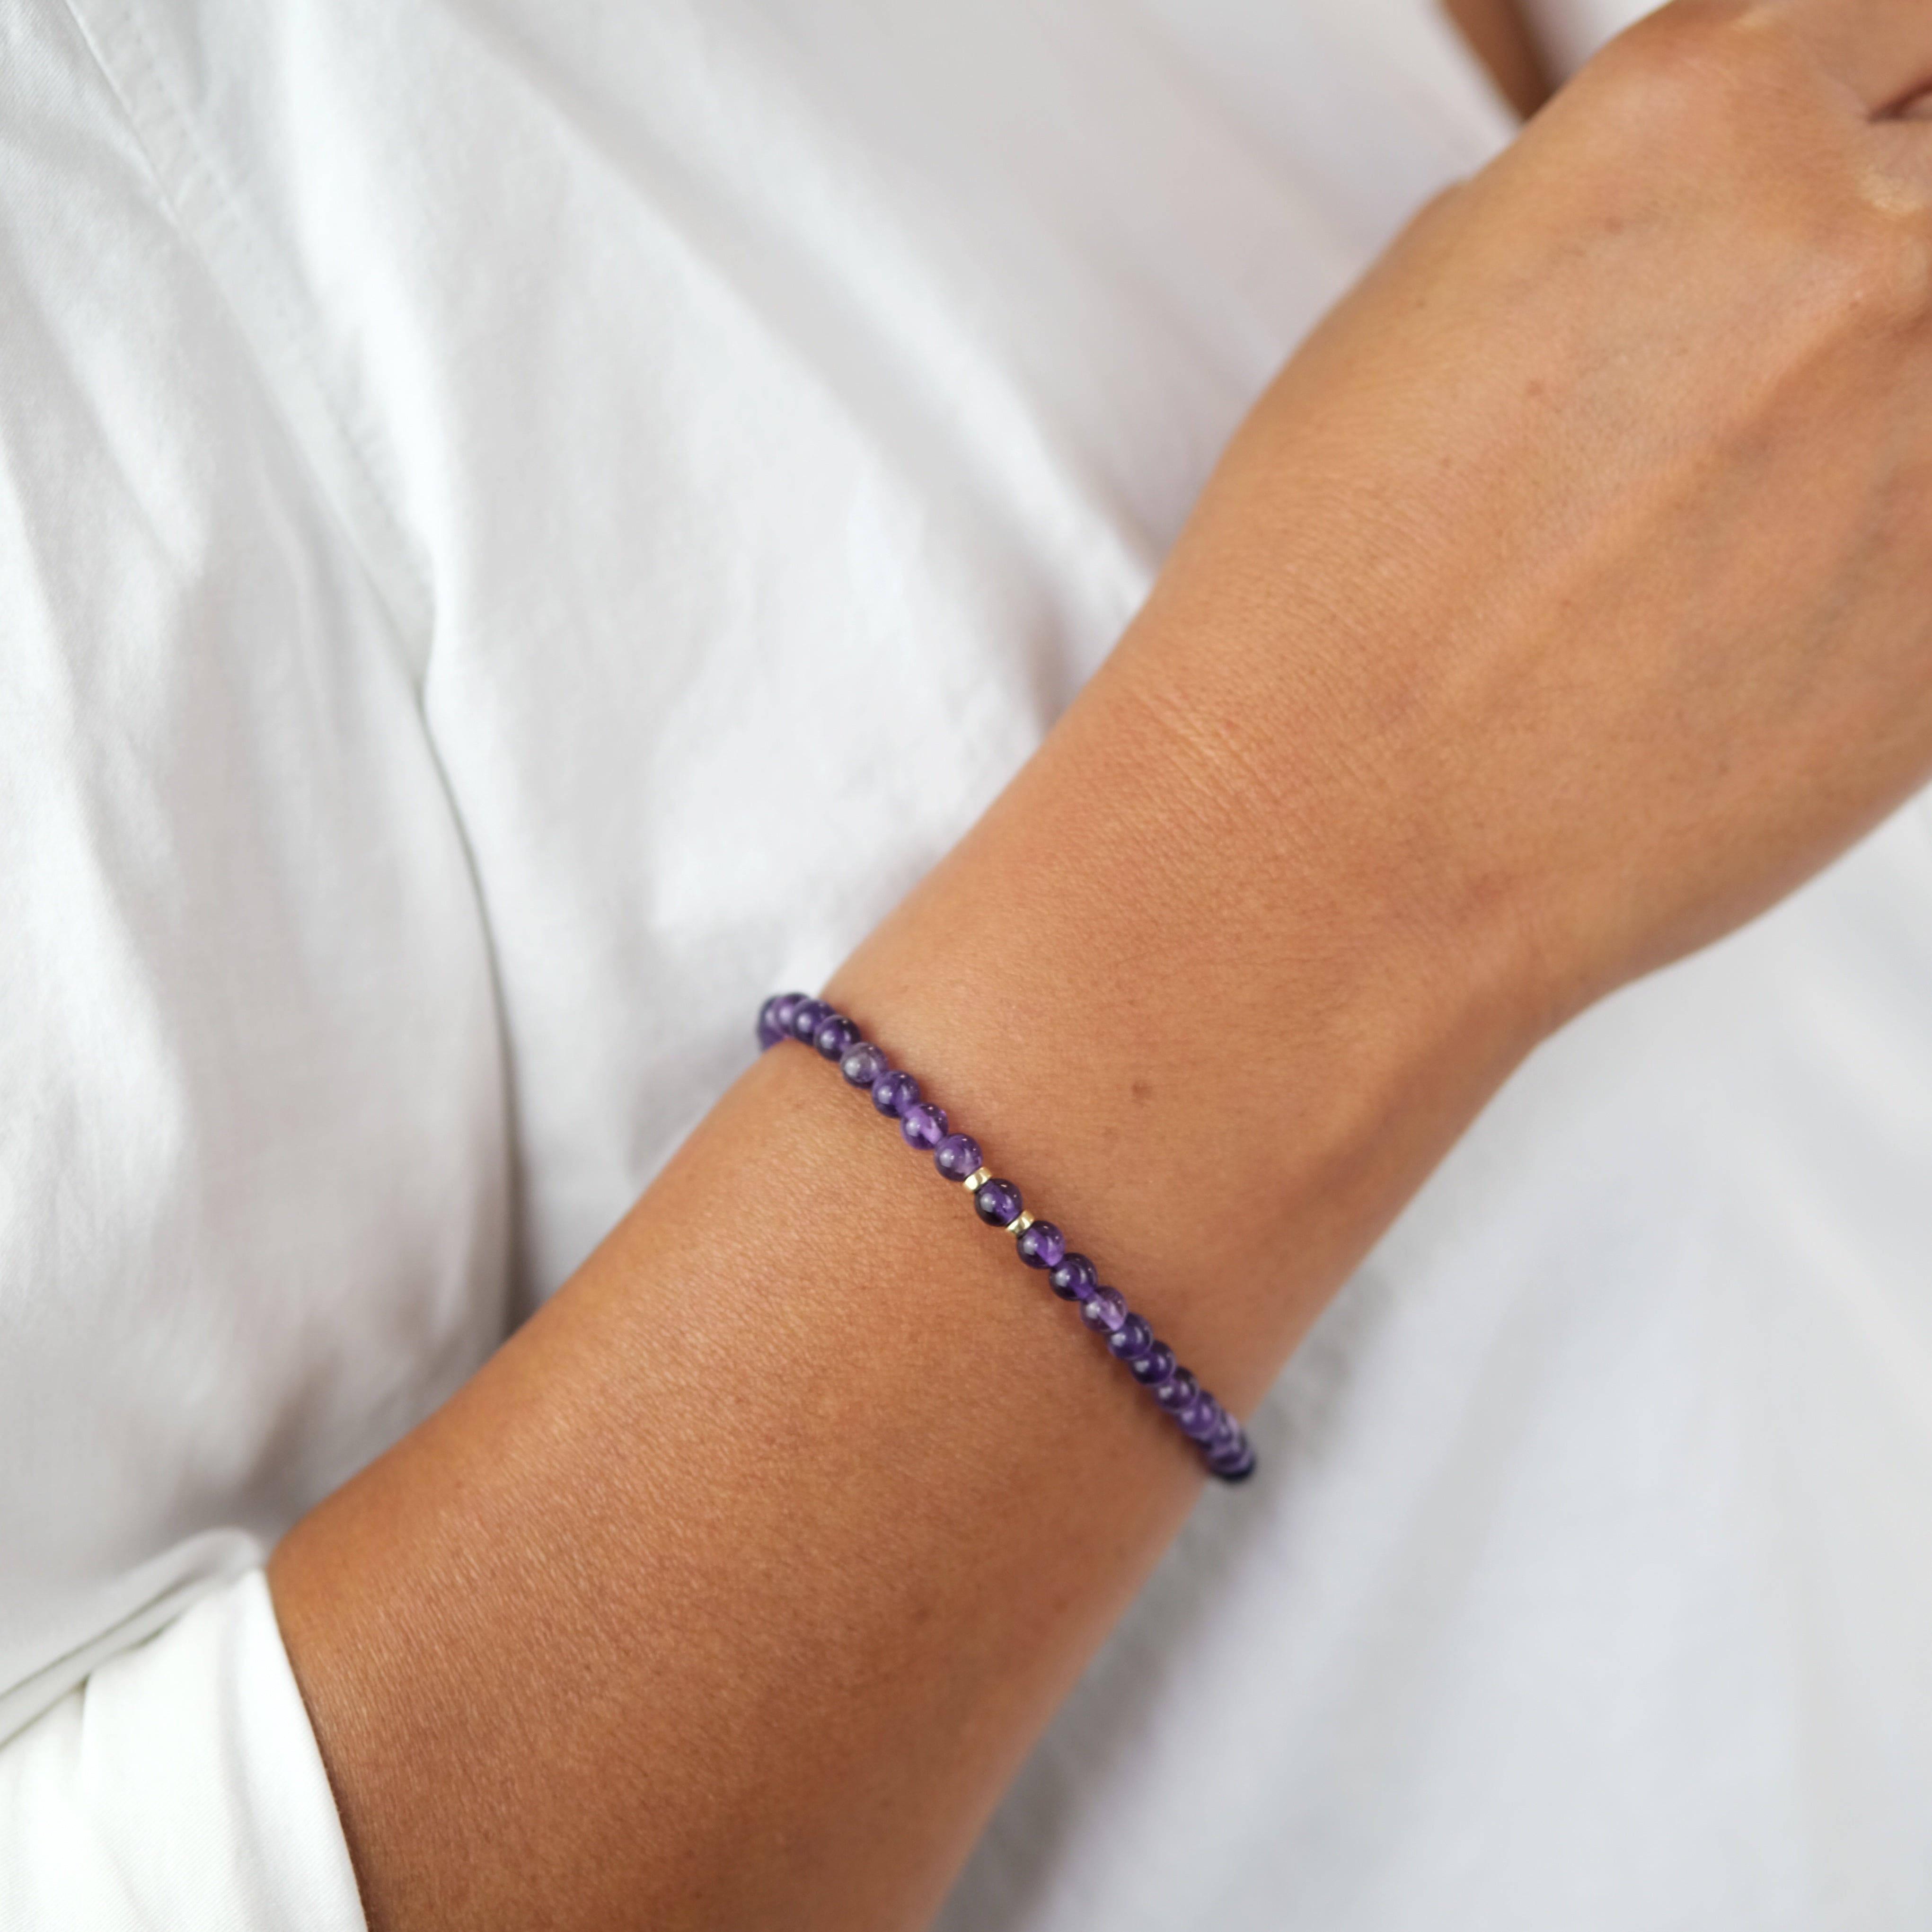 A model wearing Amethyst gemstone bracelet in 4mm beads with gold filled accessories